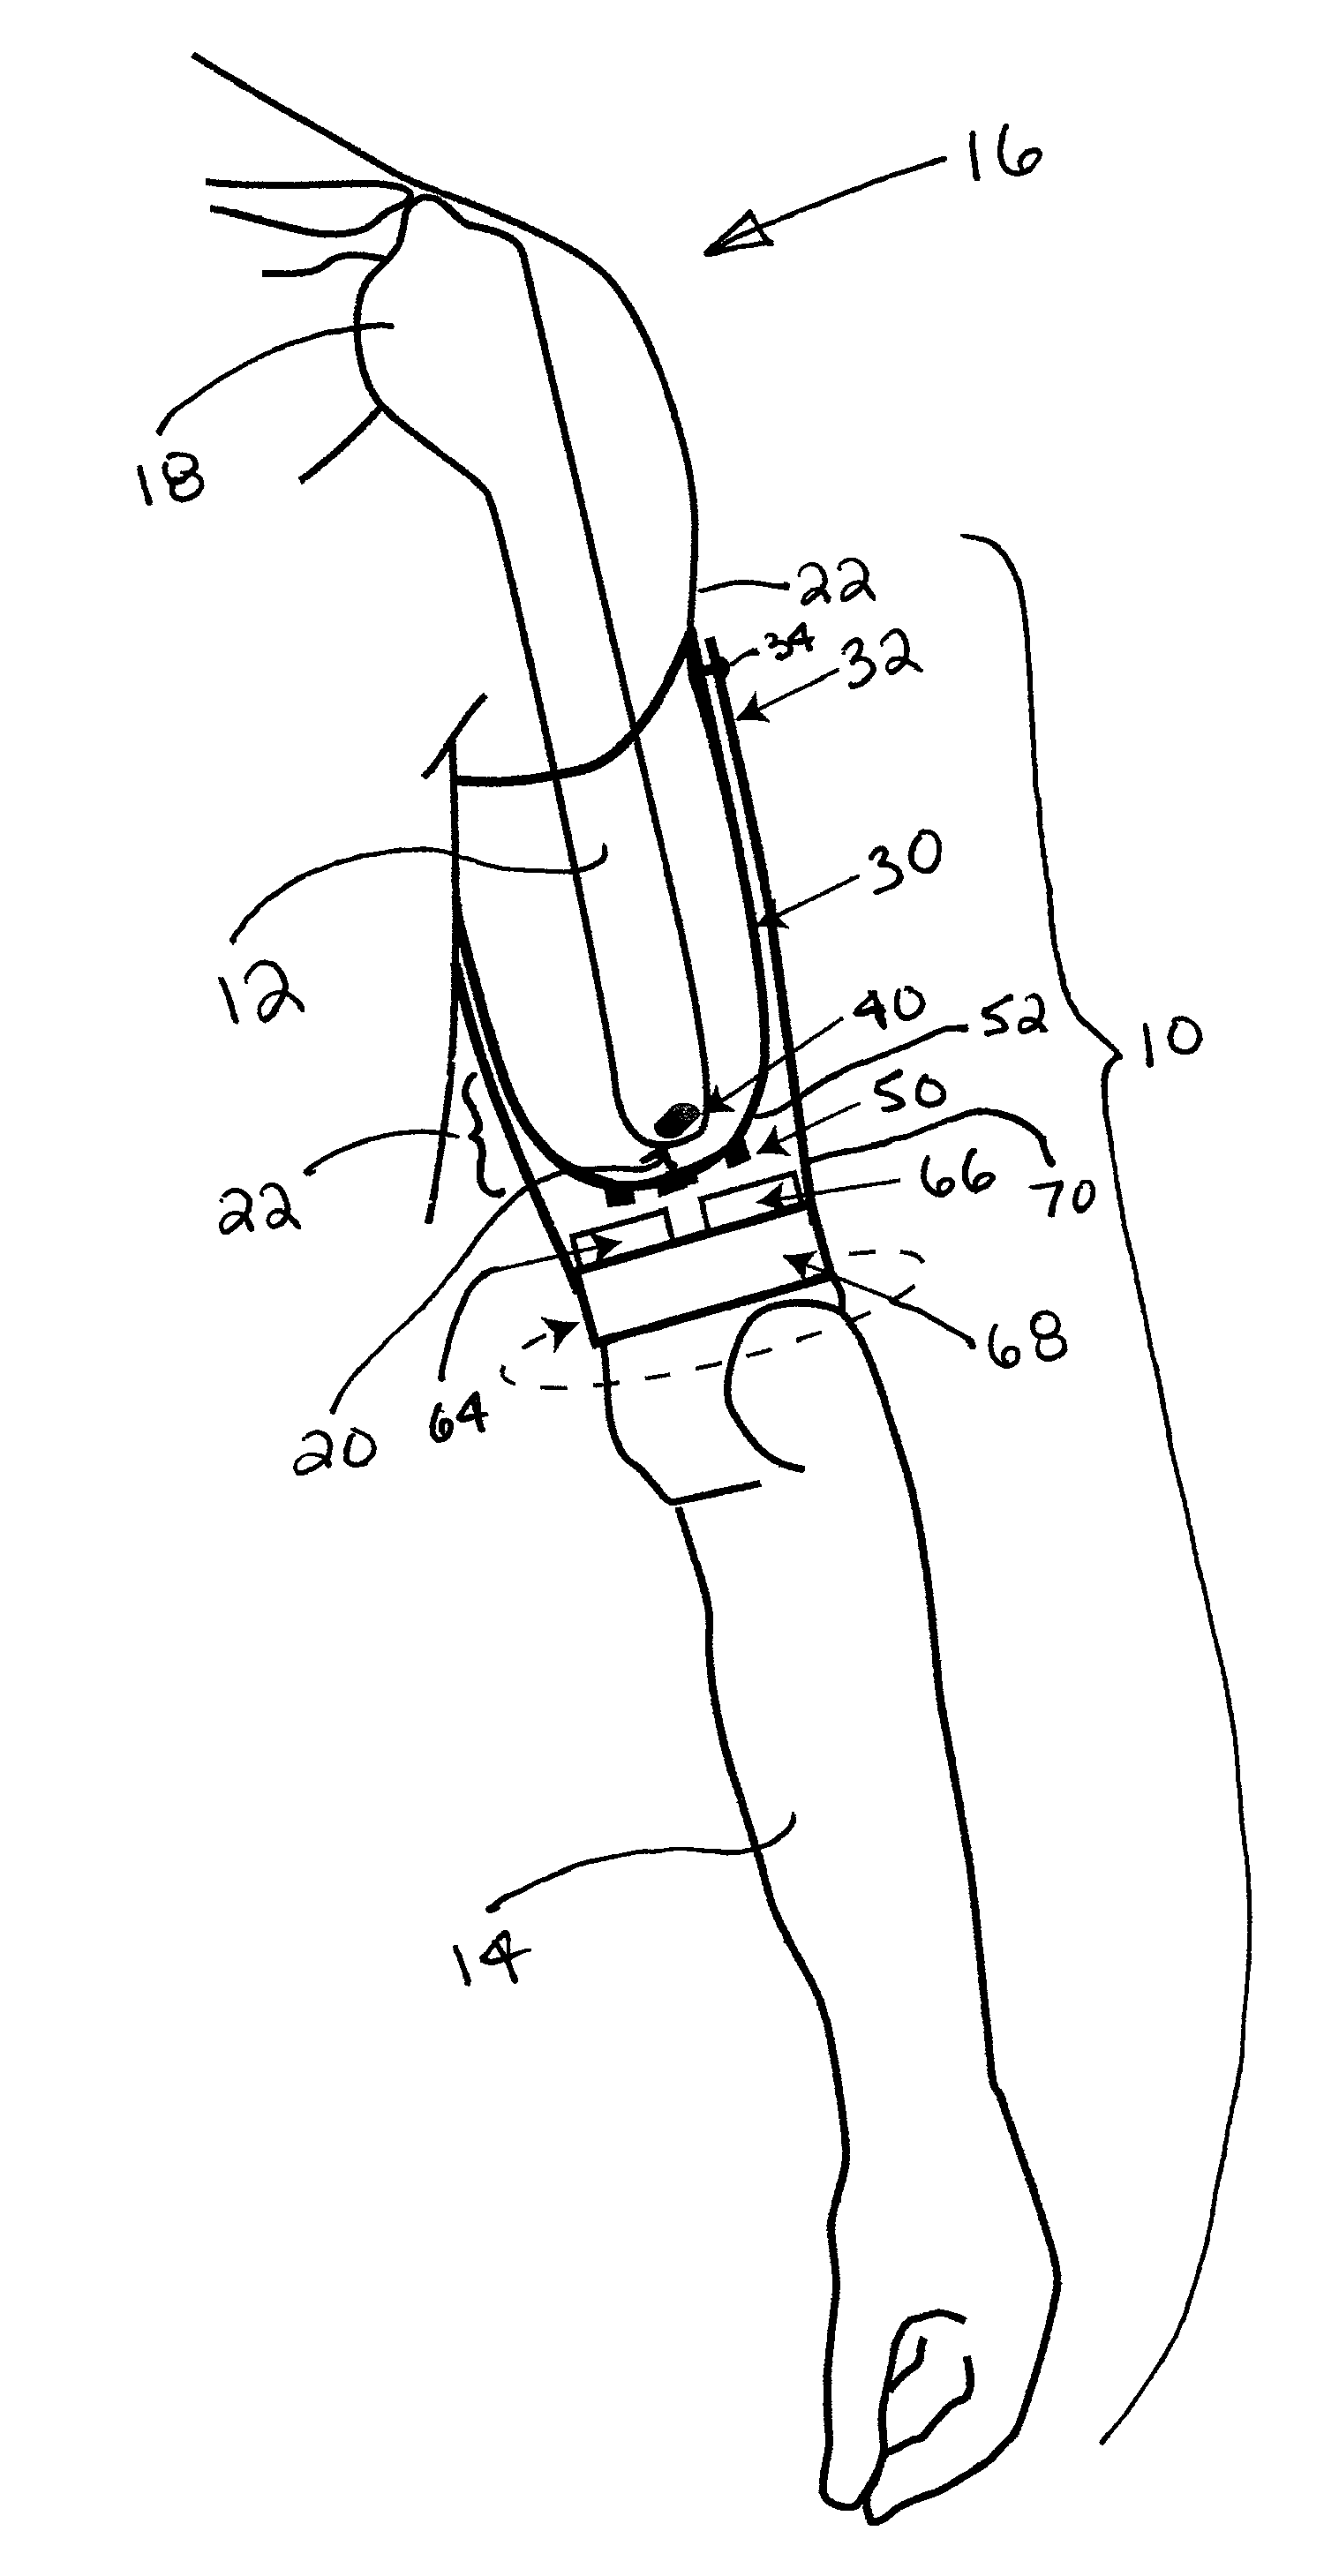 Method and apparatus for prosthetic limb rotation control